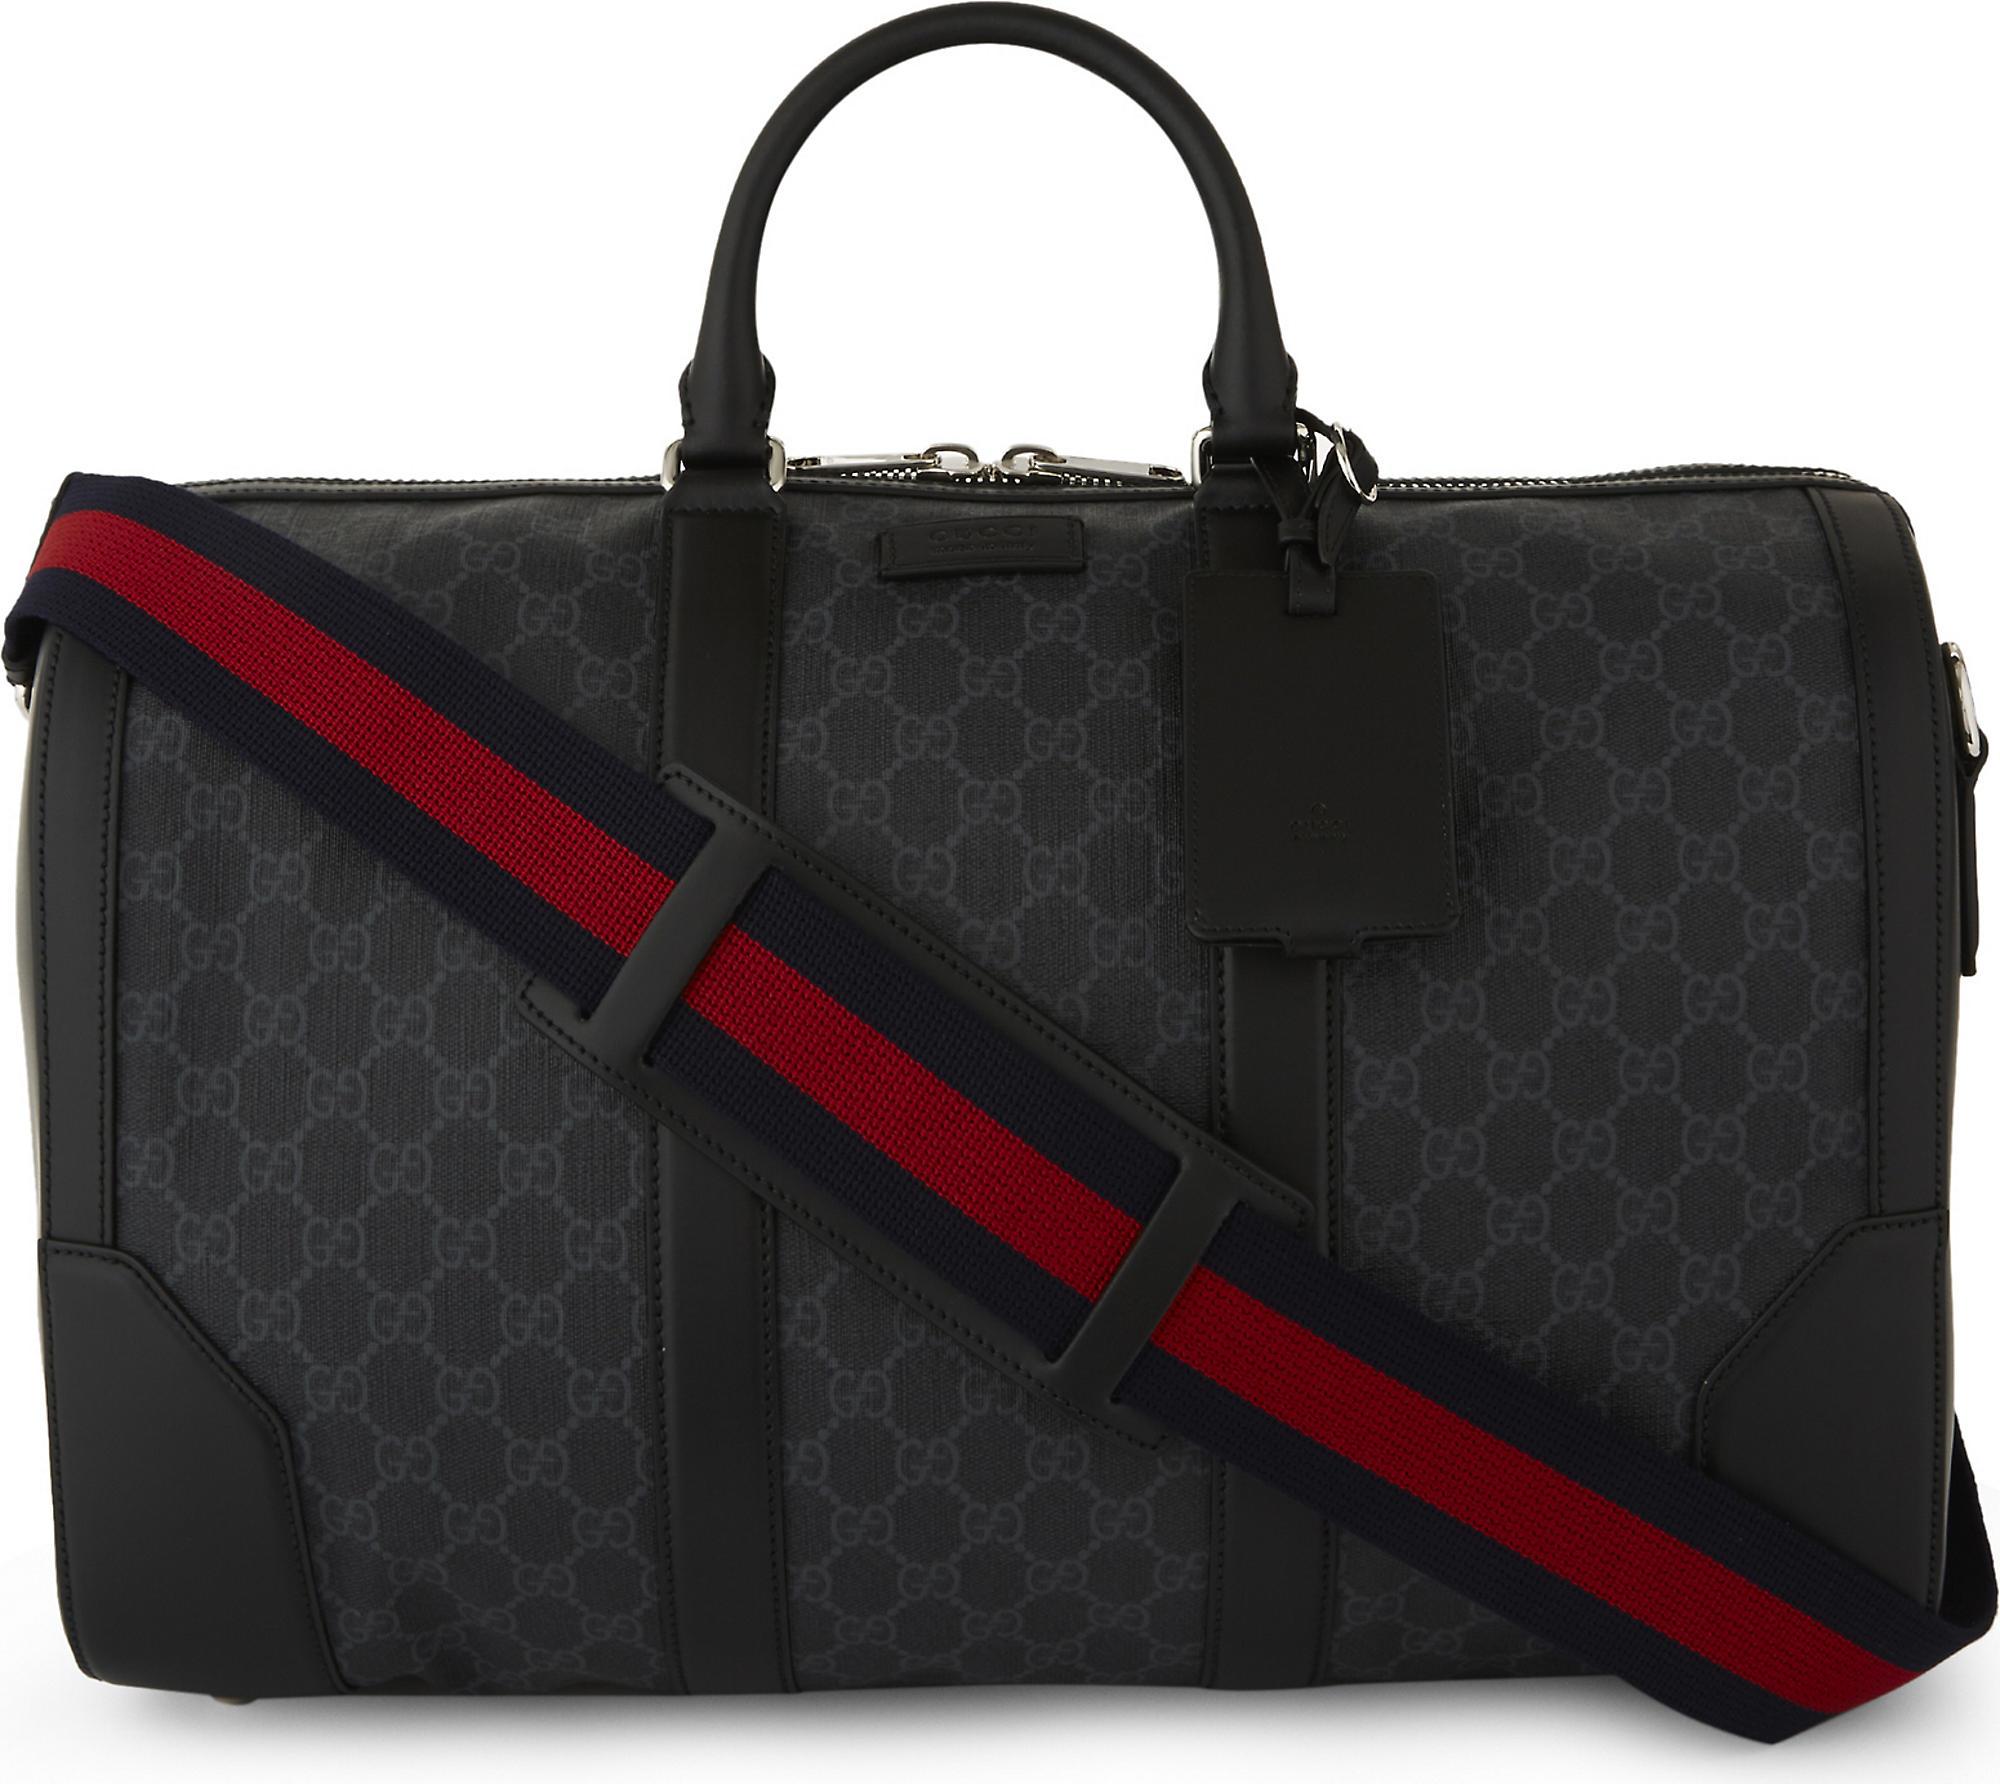 Gucci Supreme Canvas And Leather Duffle Bag in Black for Men - Lyst